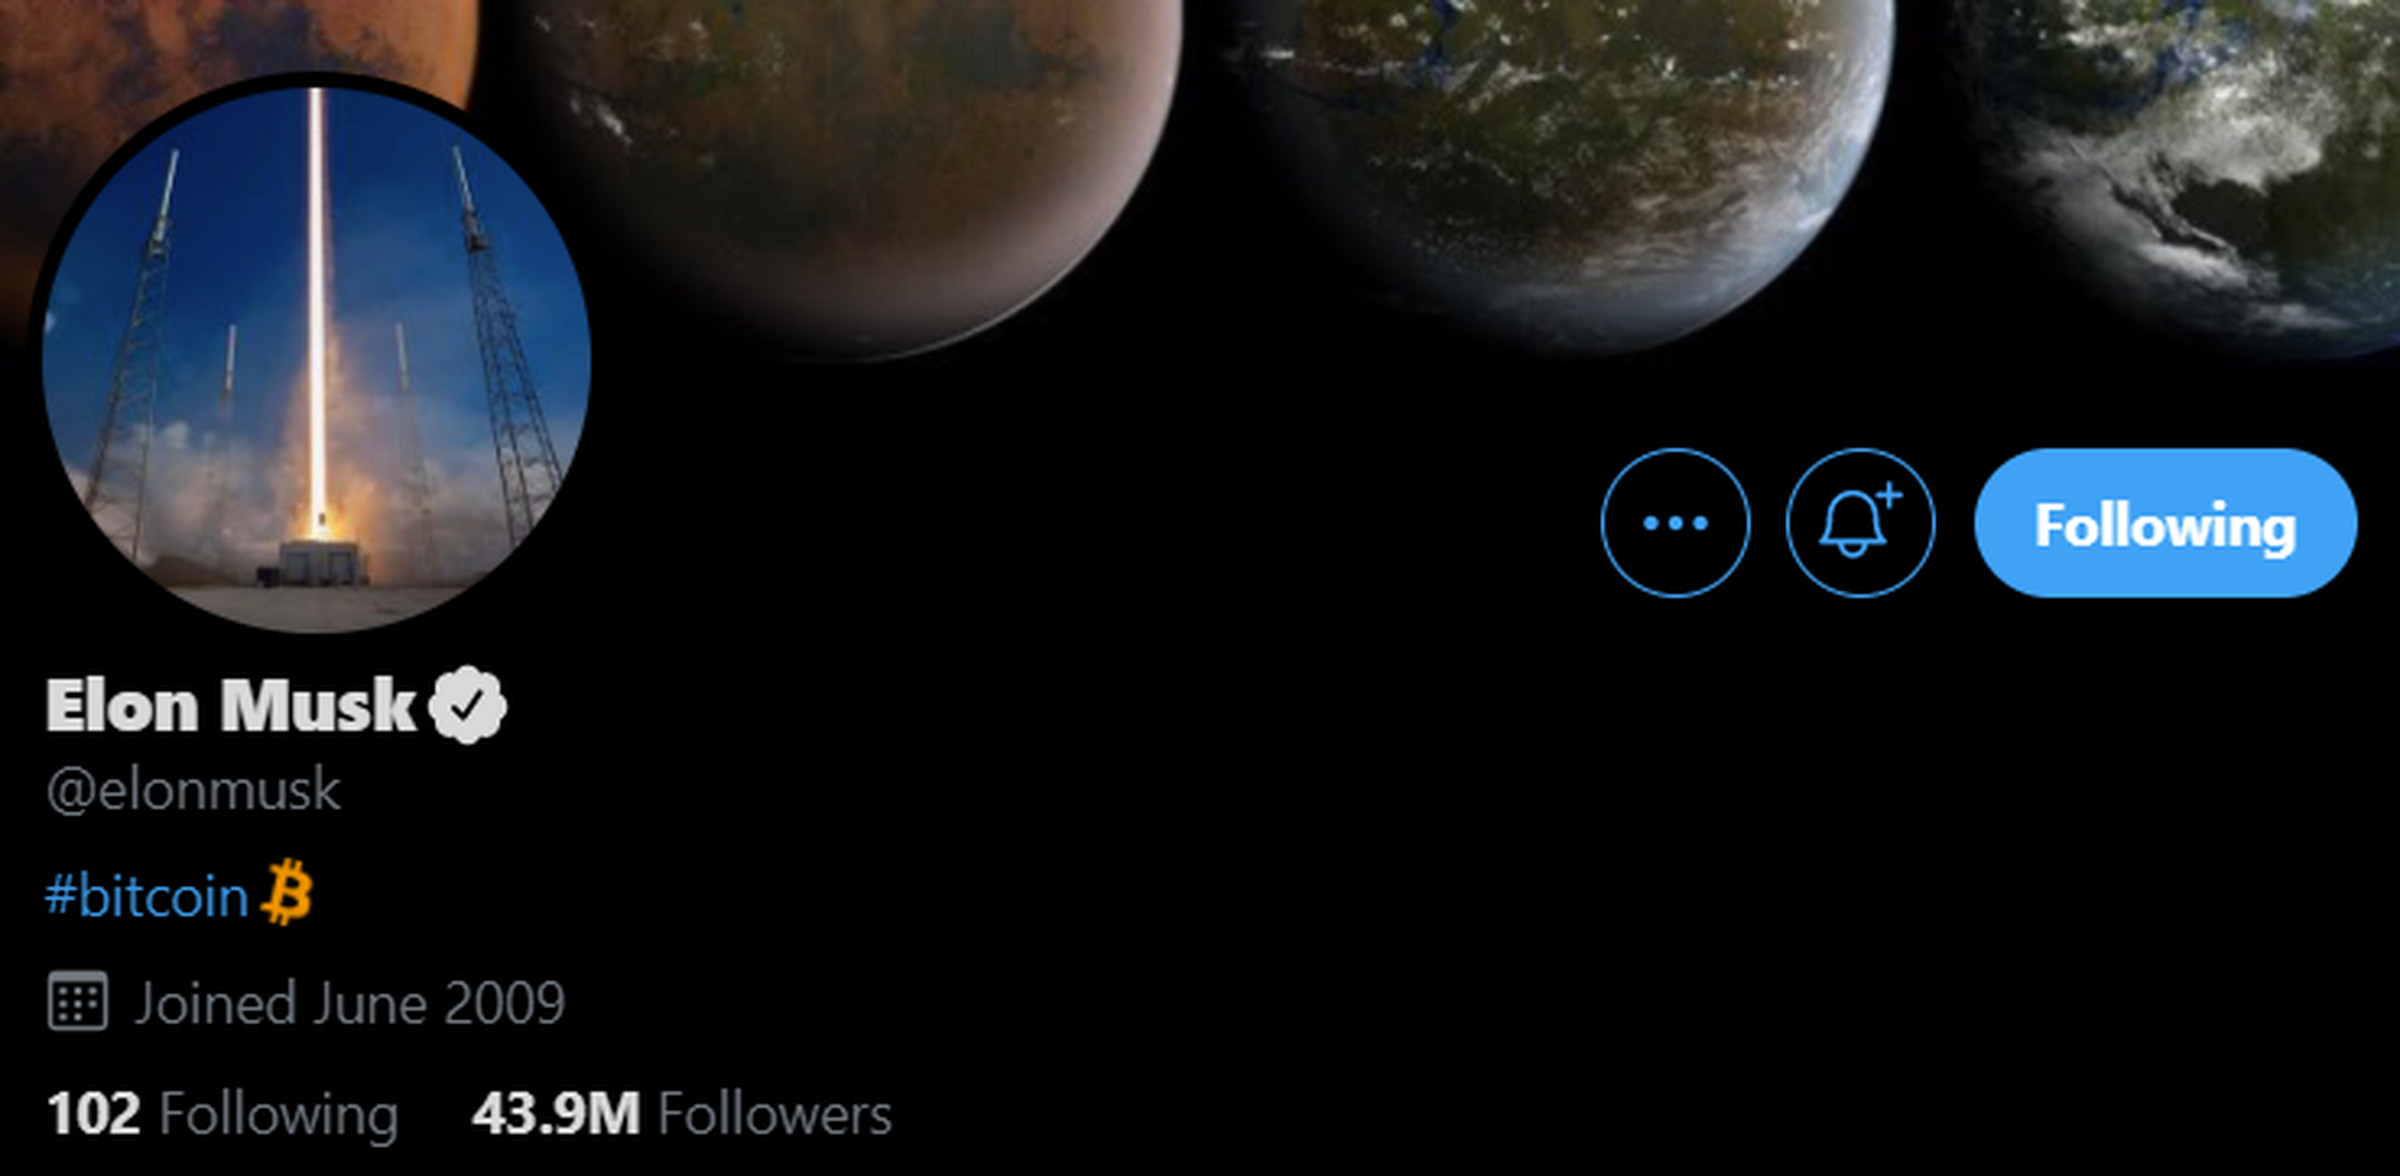 Elon Musk’s Twitter profile now mentions bitcoin.